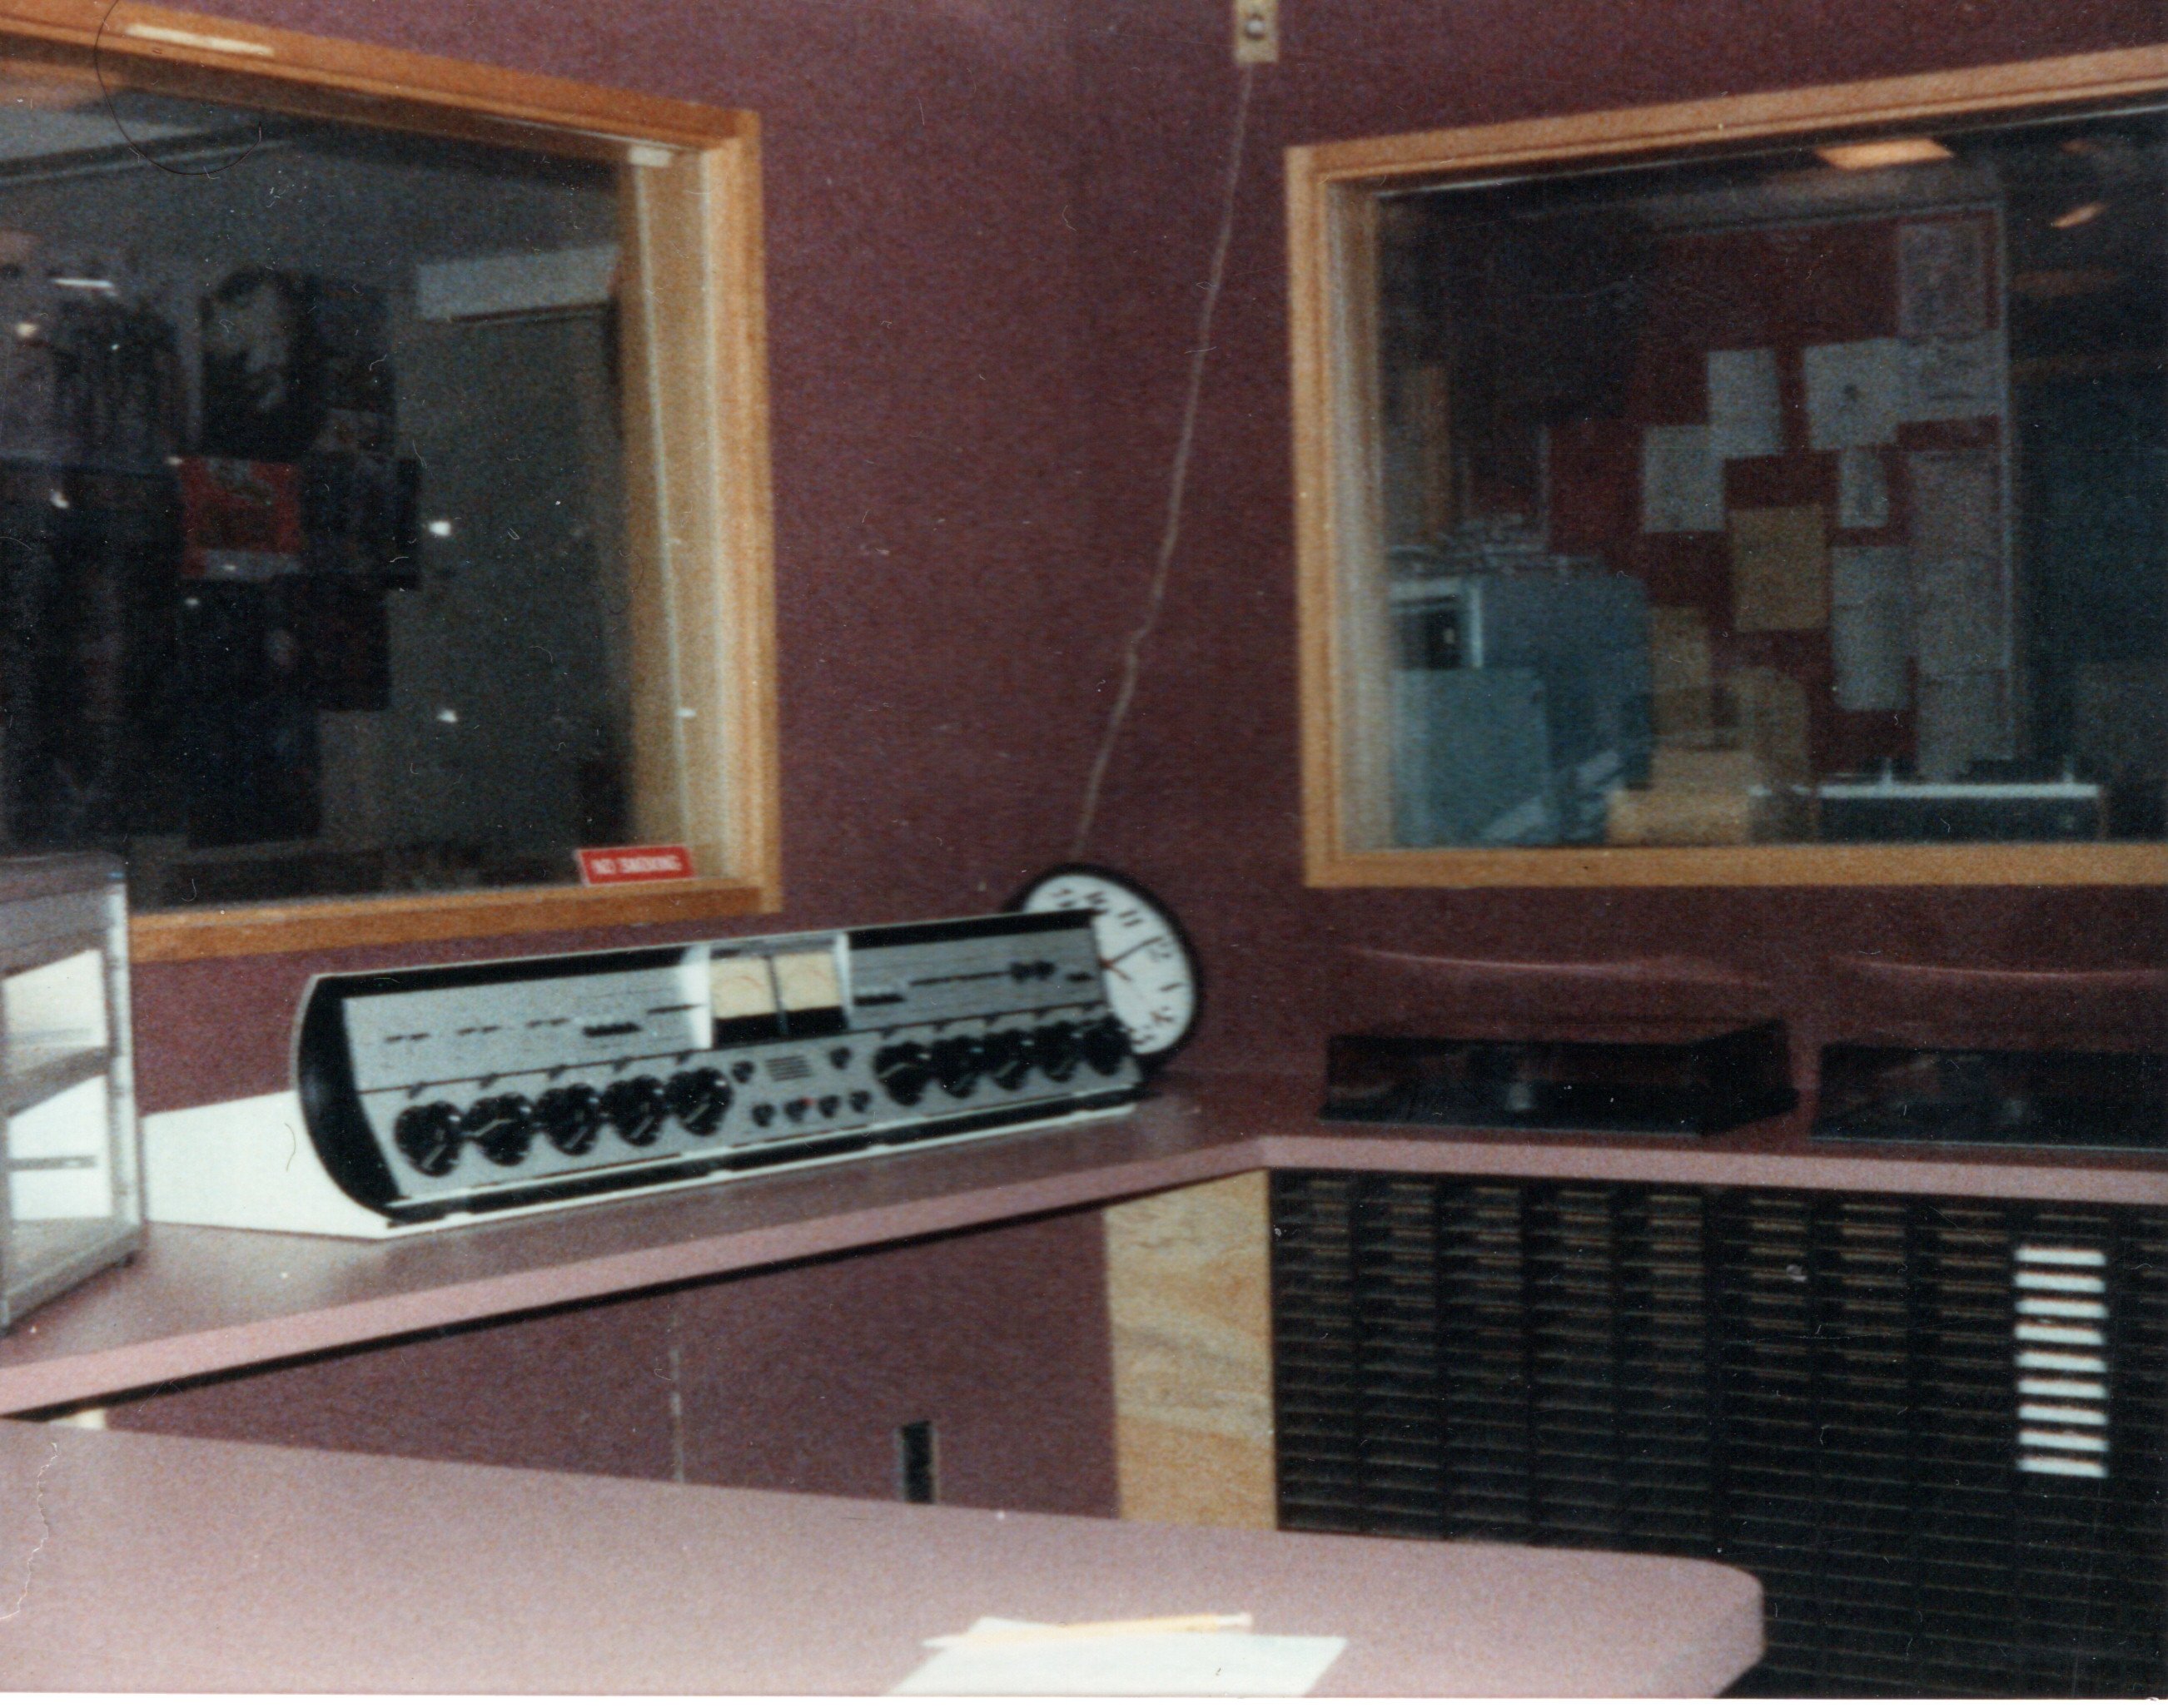 1985-Production Rebuild - With the wall Covering in place and the cabinets coming along.